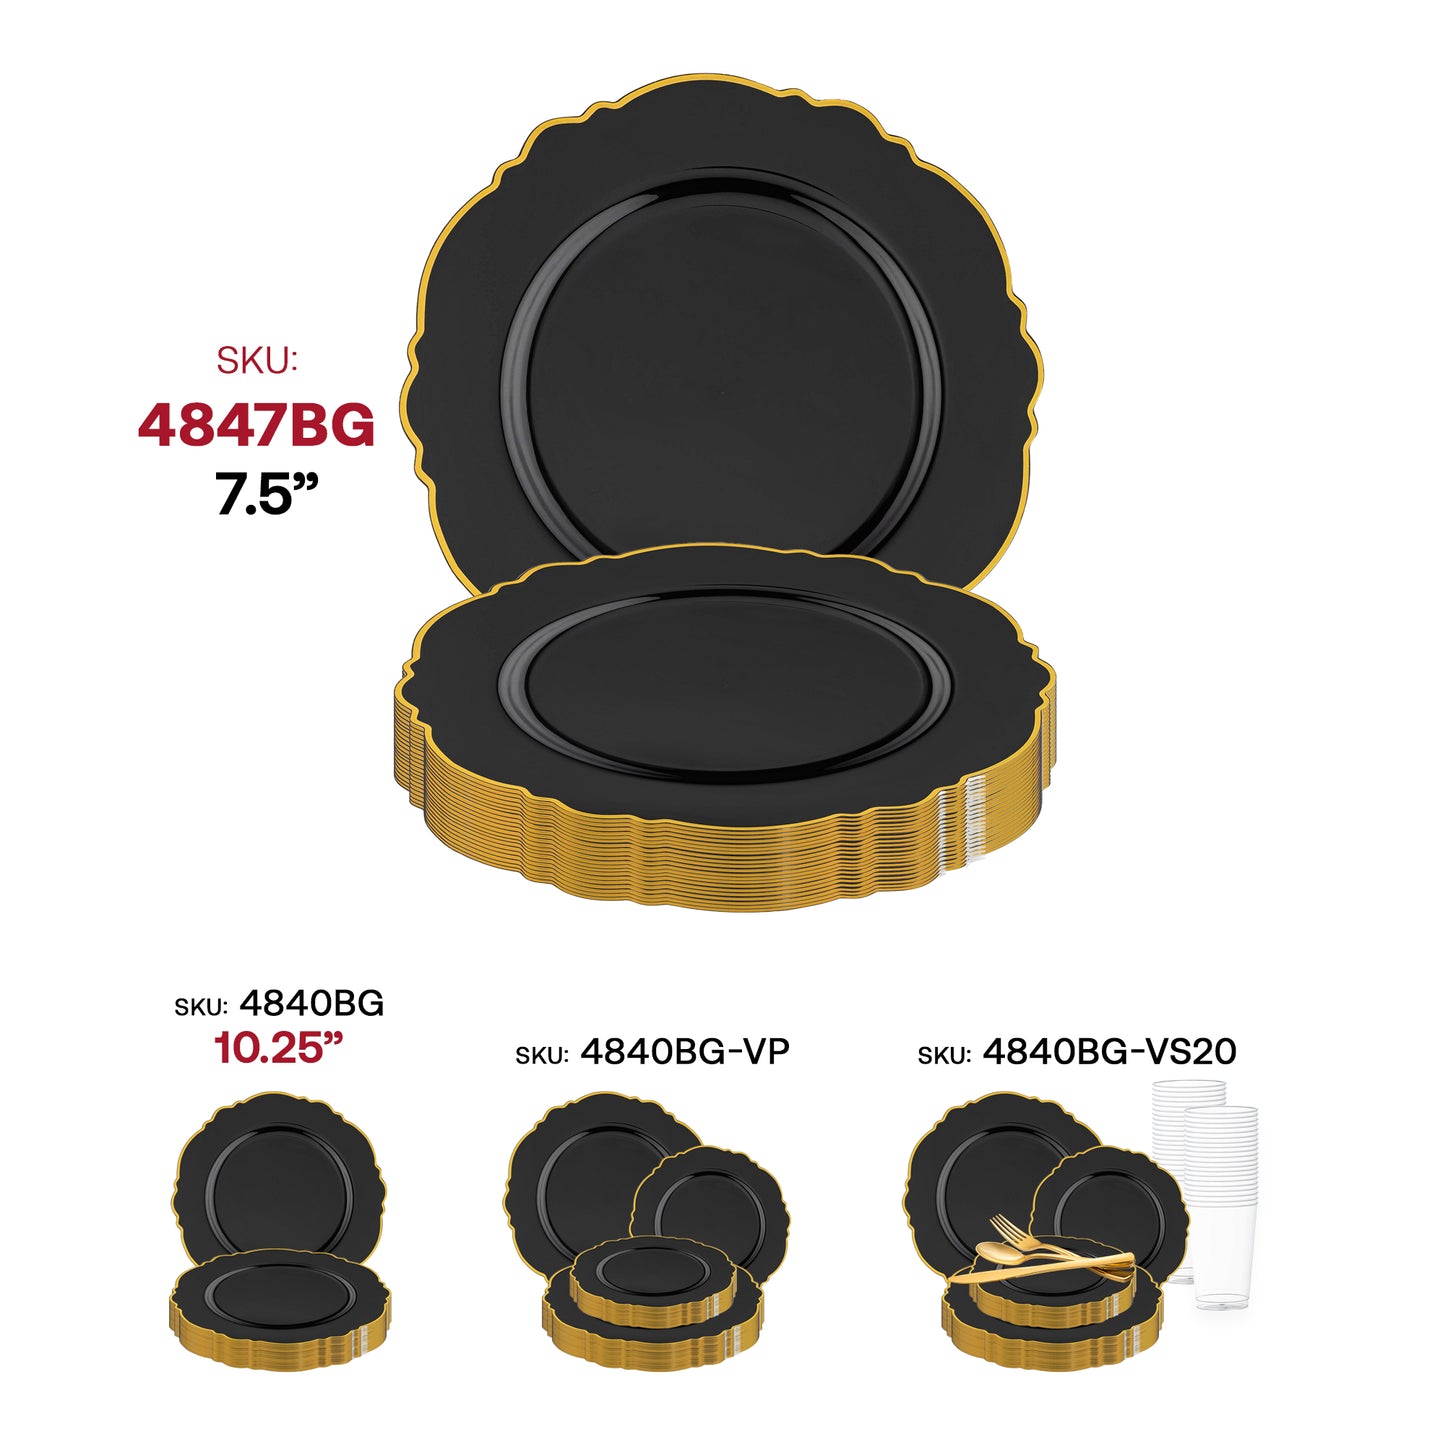 Black with Gold Rim Round Blossom Disposable Plastic Appetizer/Salad Plates (7.5") SKU | The Kaya Collection